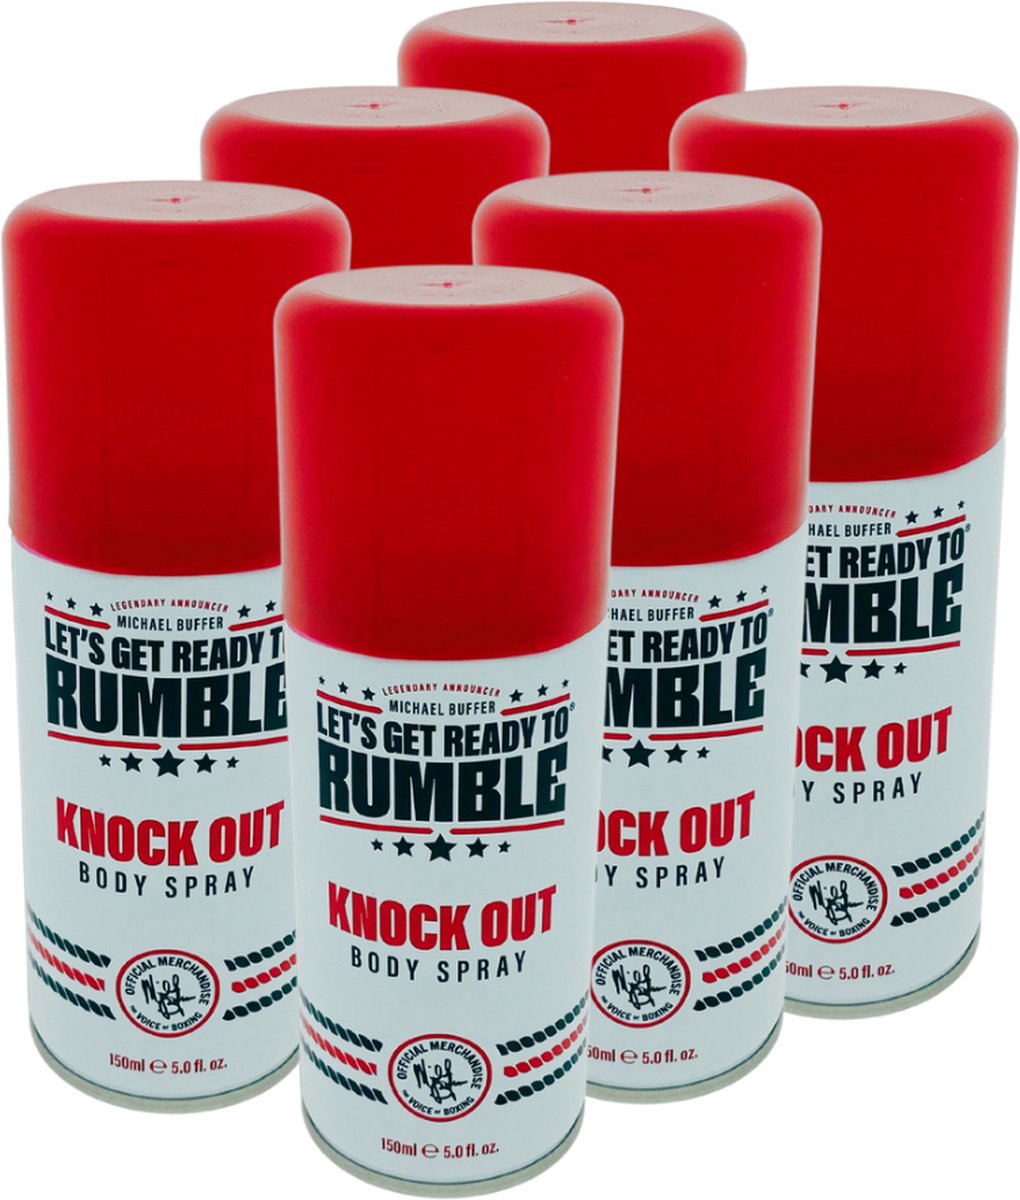 Let’s Get Ready To Rumble Bodyspray 150ml – Knock Out 6x